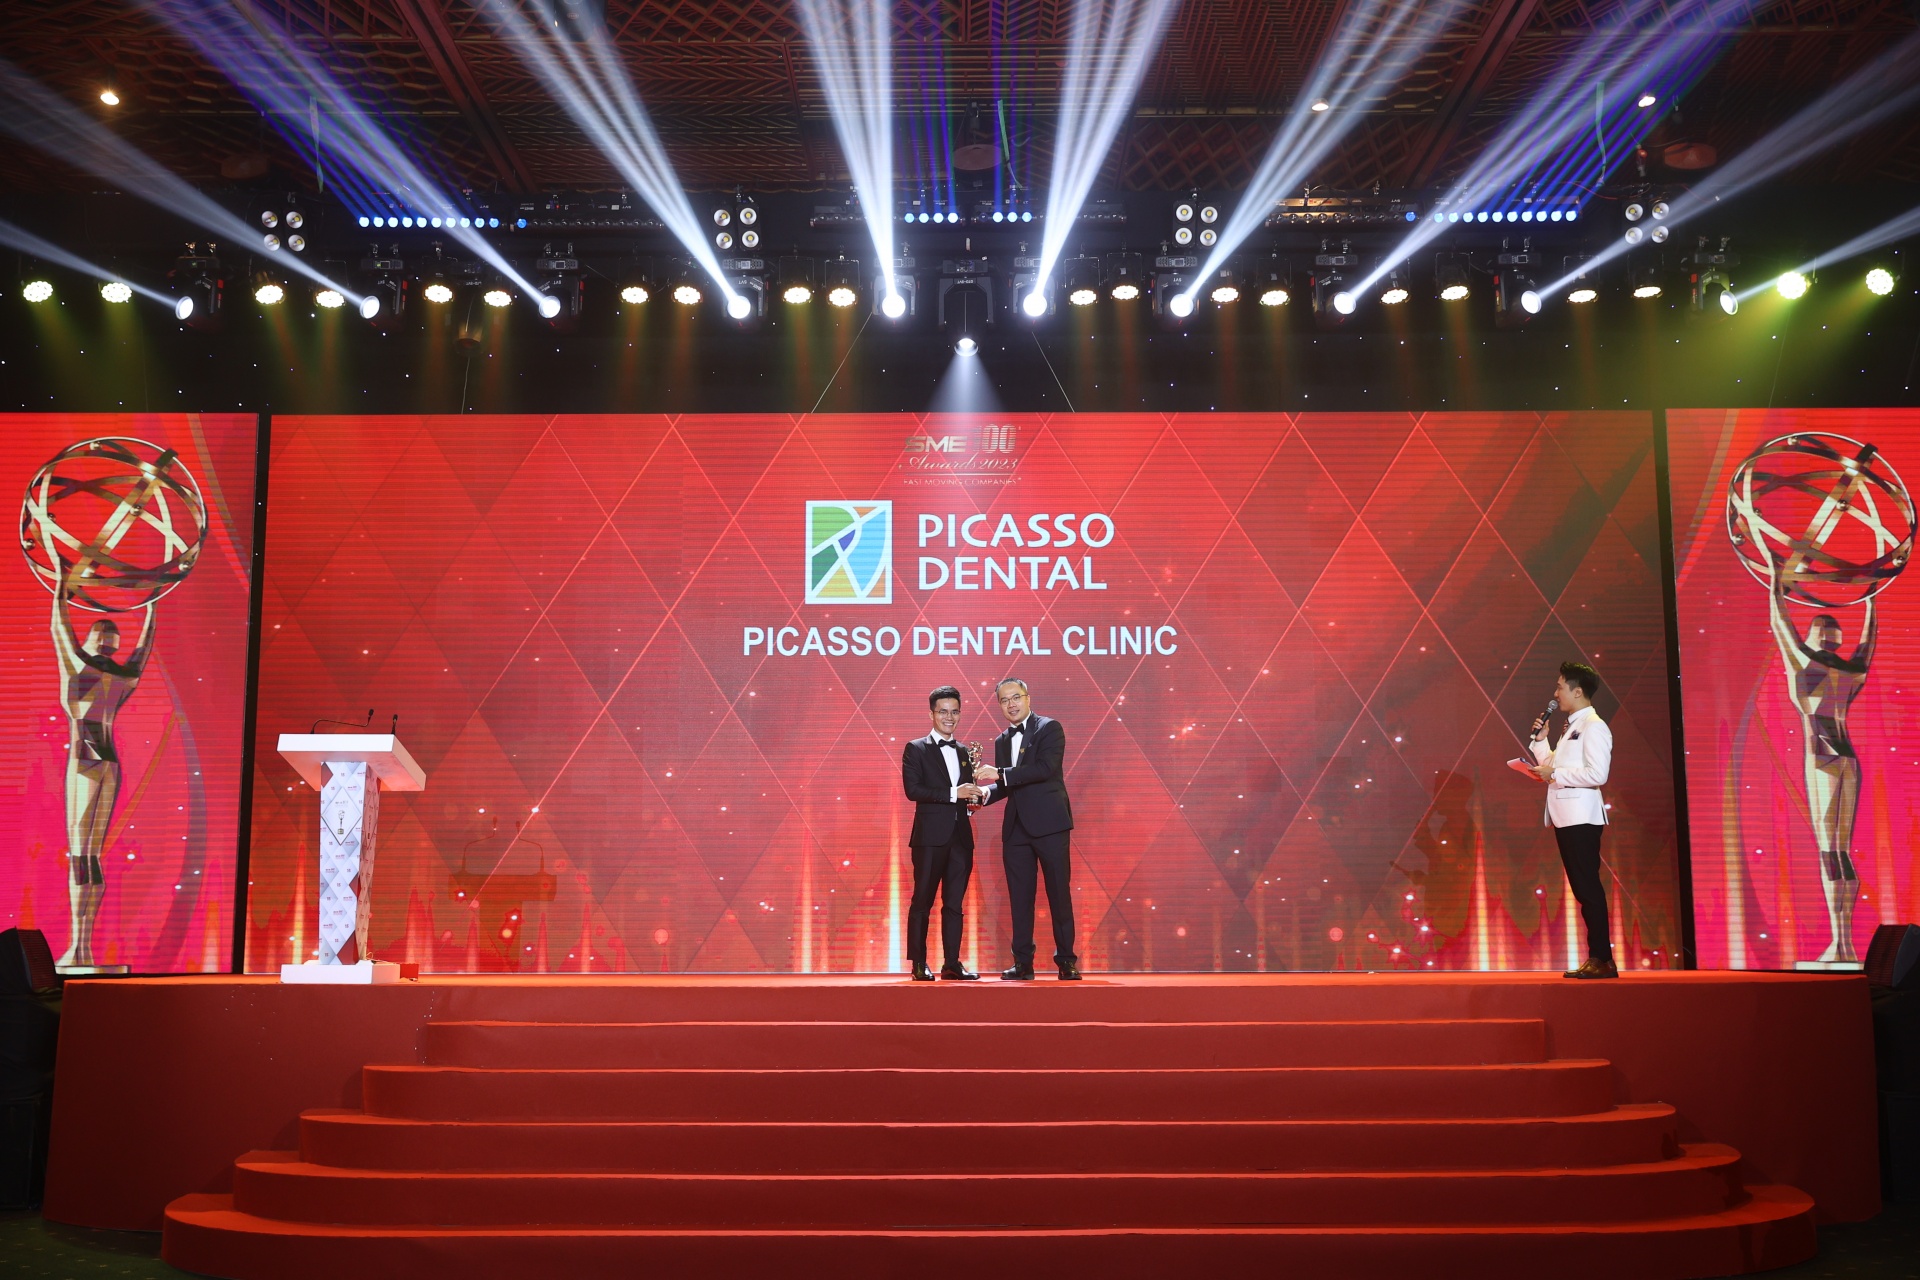 Picasso Dental Clinic: Affirming leading position in the dental industry